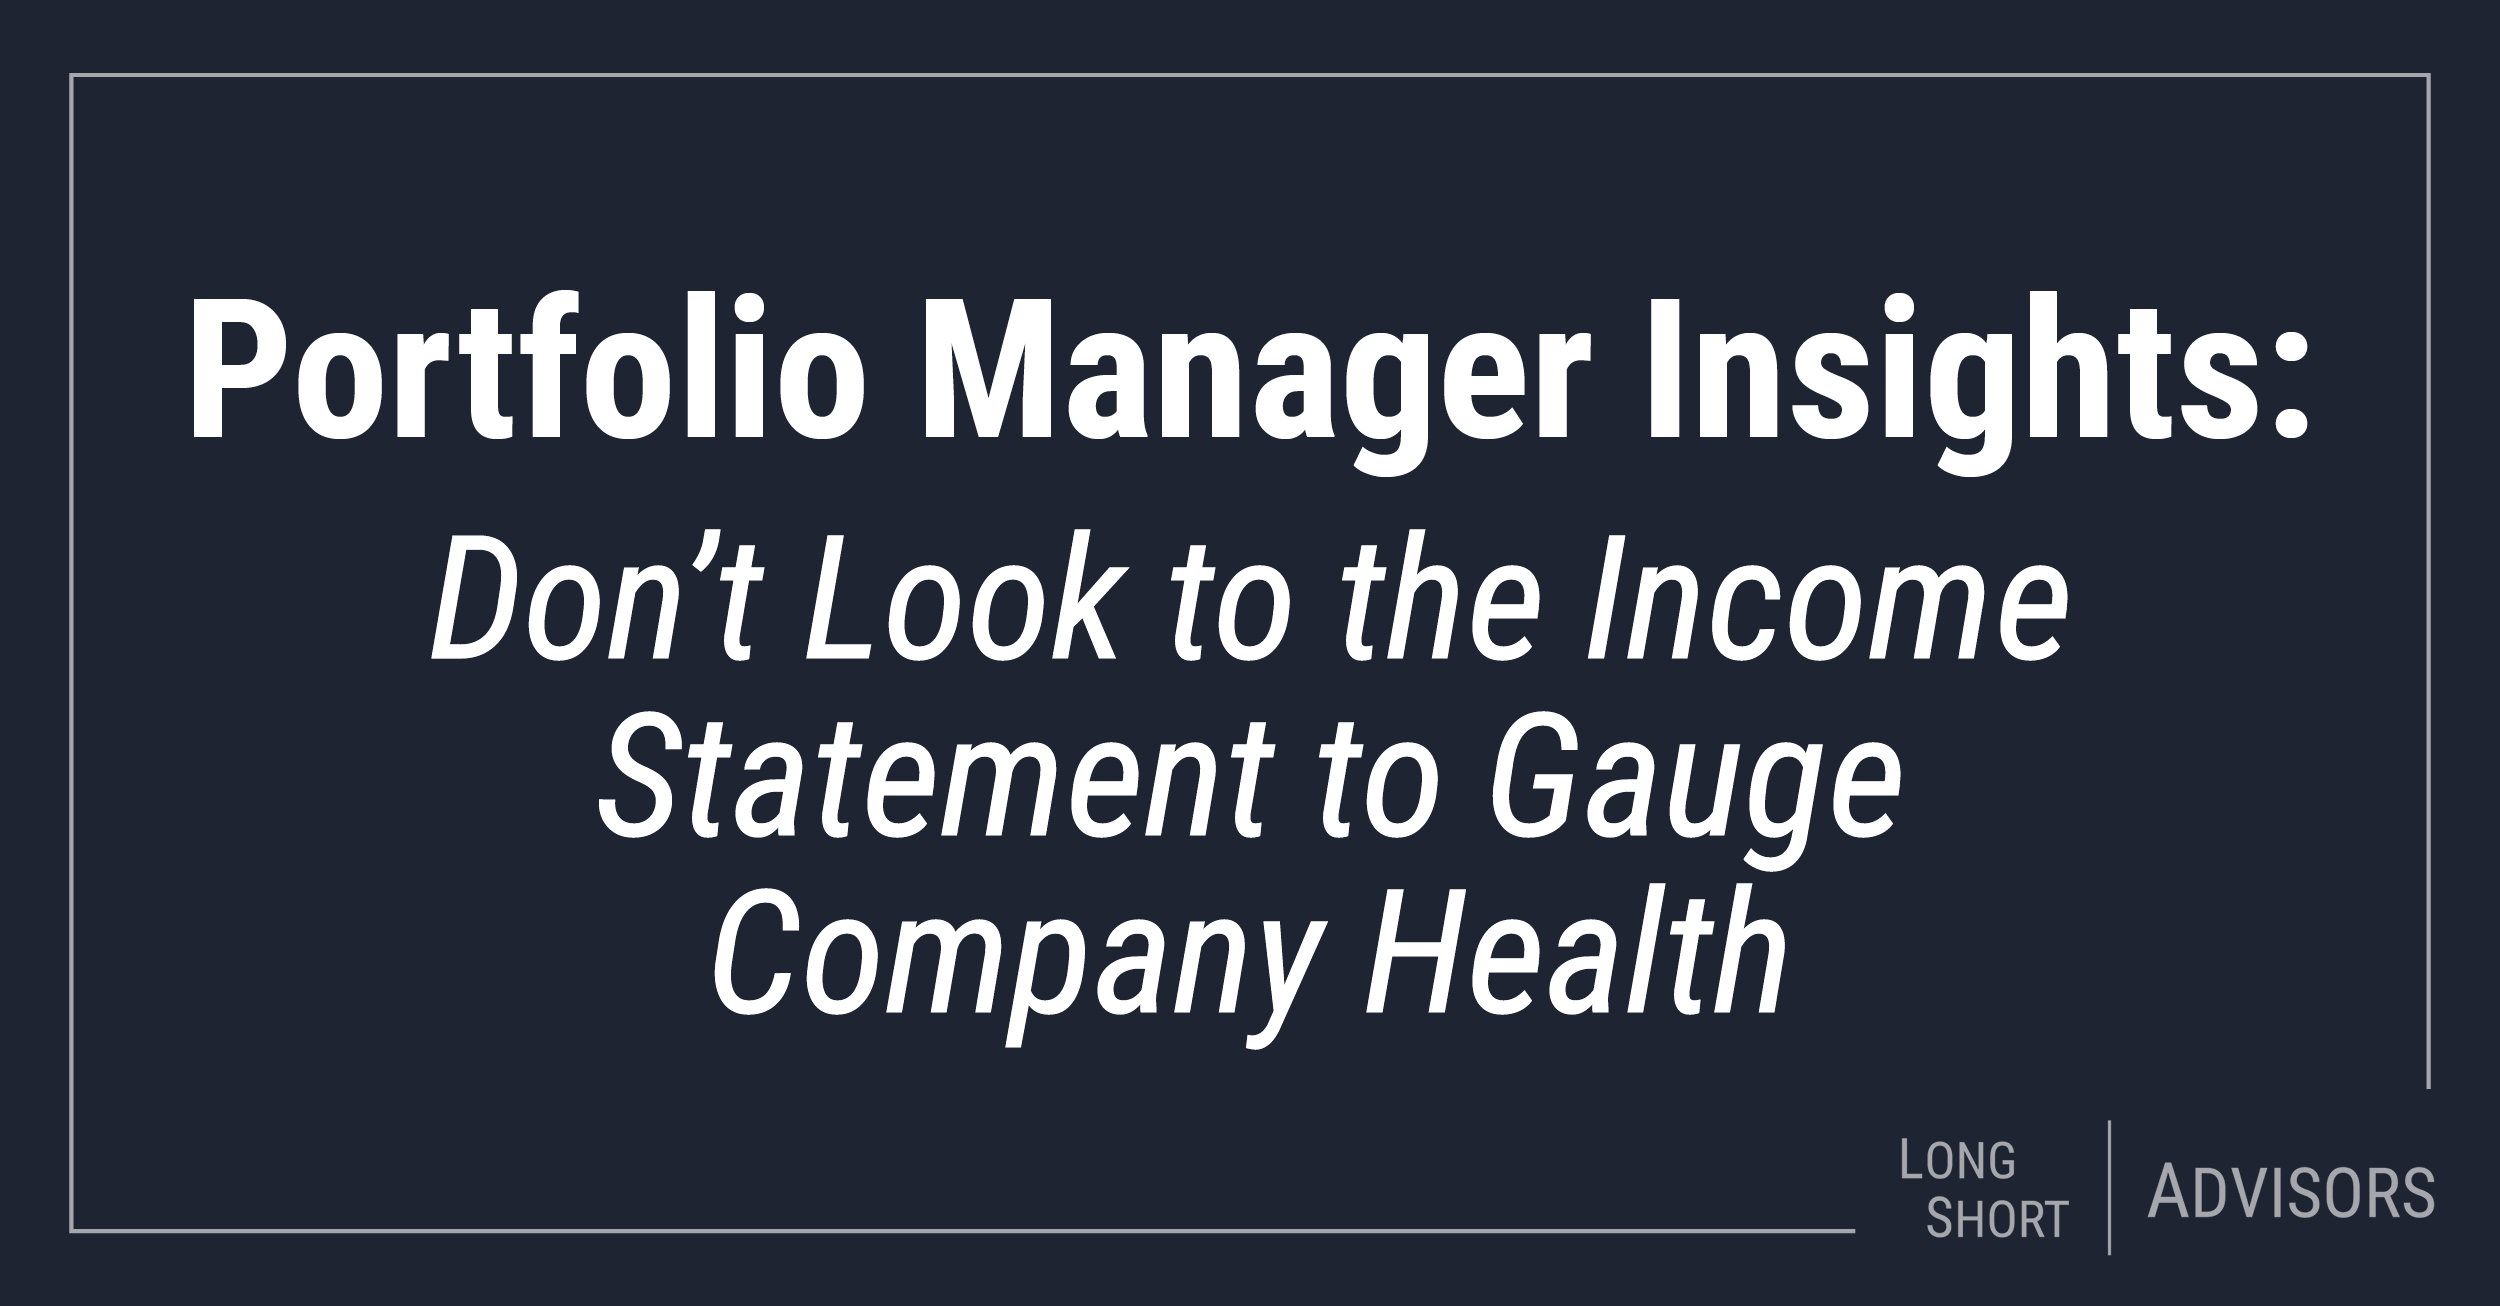 Don’t Look to the Income Statement to Gauge Company Health